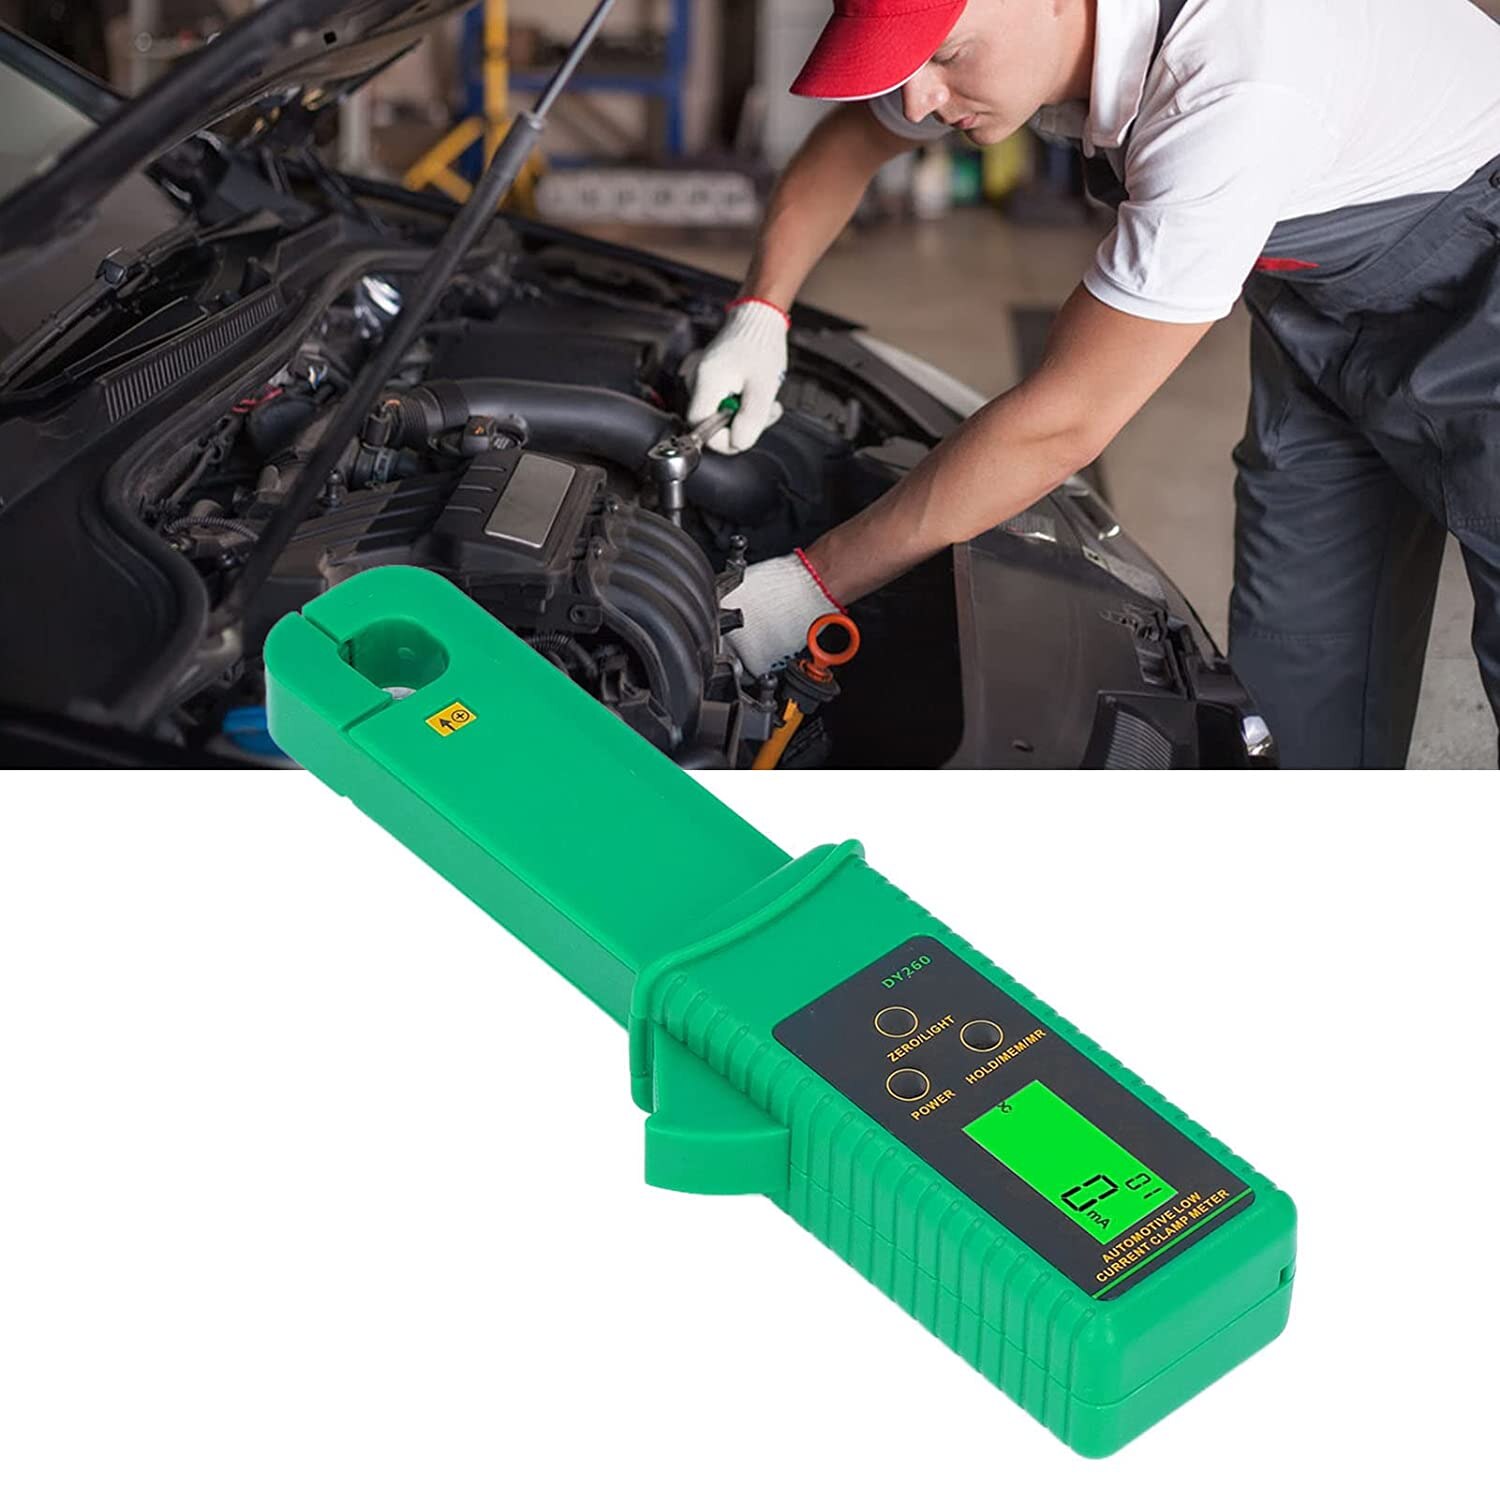 DUOYI DY260 Portable AC/DC Leakage Current Clamp Meter Tester And OEM Multimeter 0mA-60A for Car Automotive Current Tester